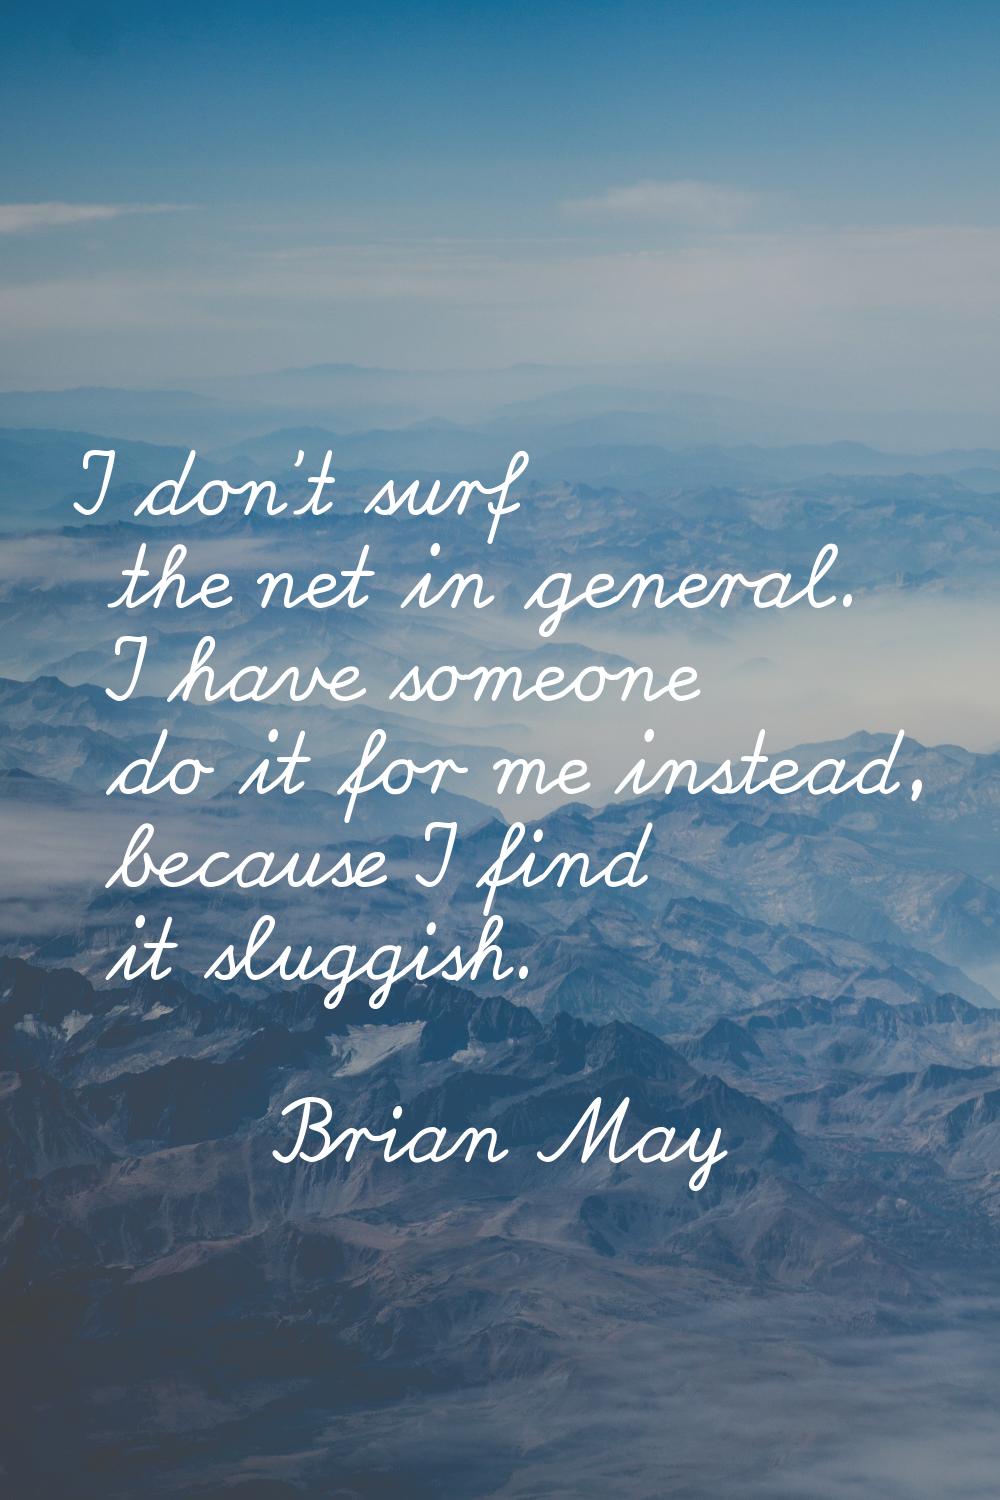 I don't surf the net in general. I have someone do it for me instead, because I find it sluggish.